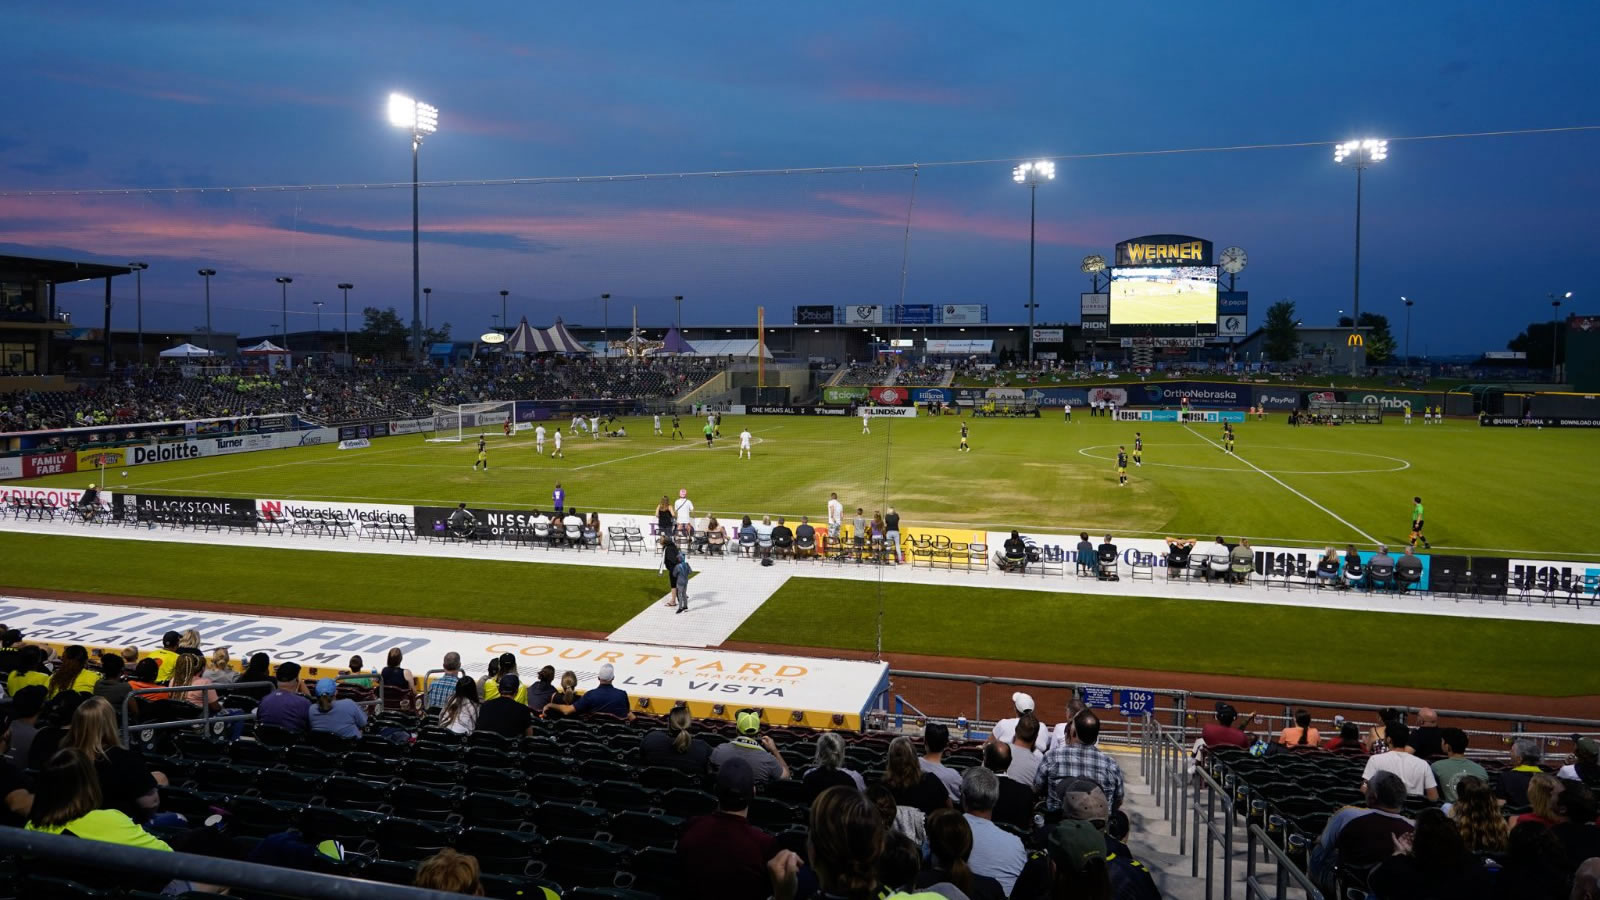 Lozier employees celebrate at Union Omaha soccer game